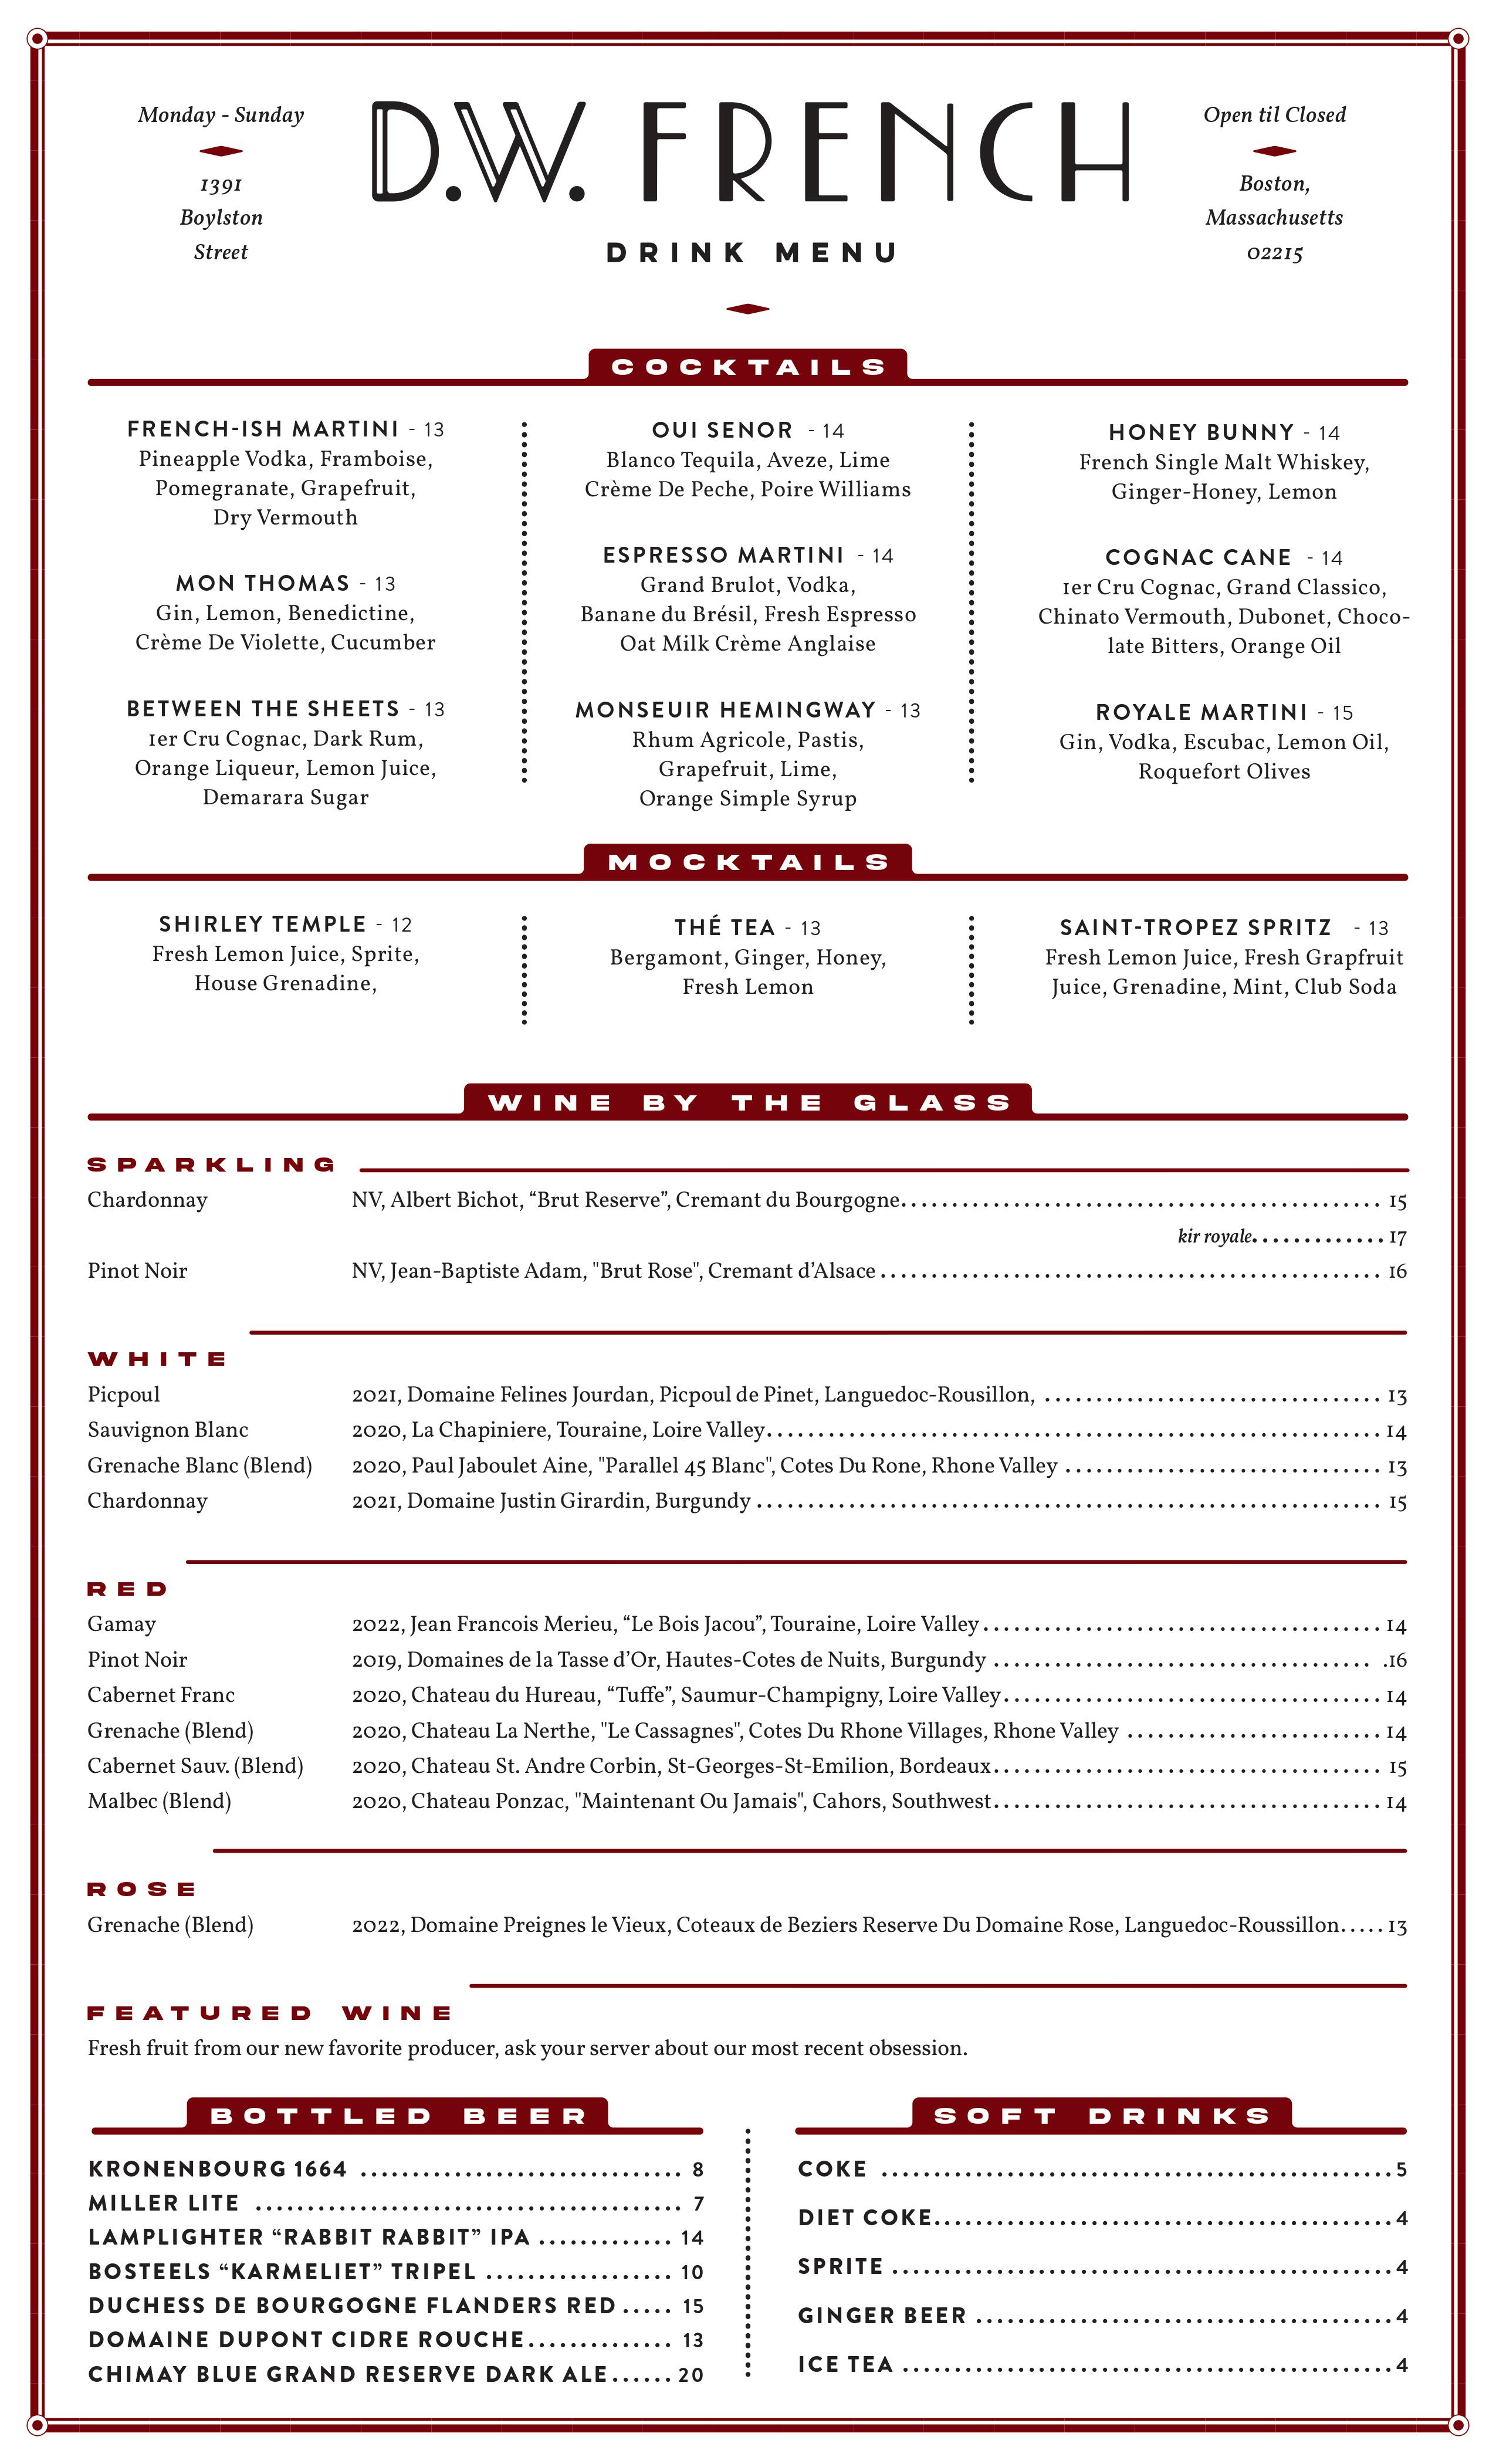 Drink menu for a restaurant called DW French